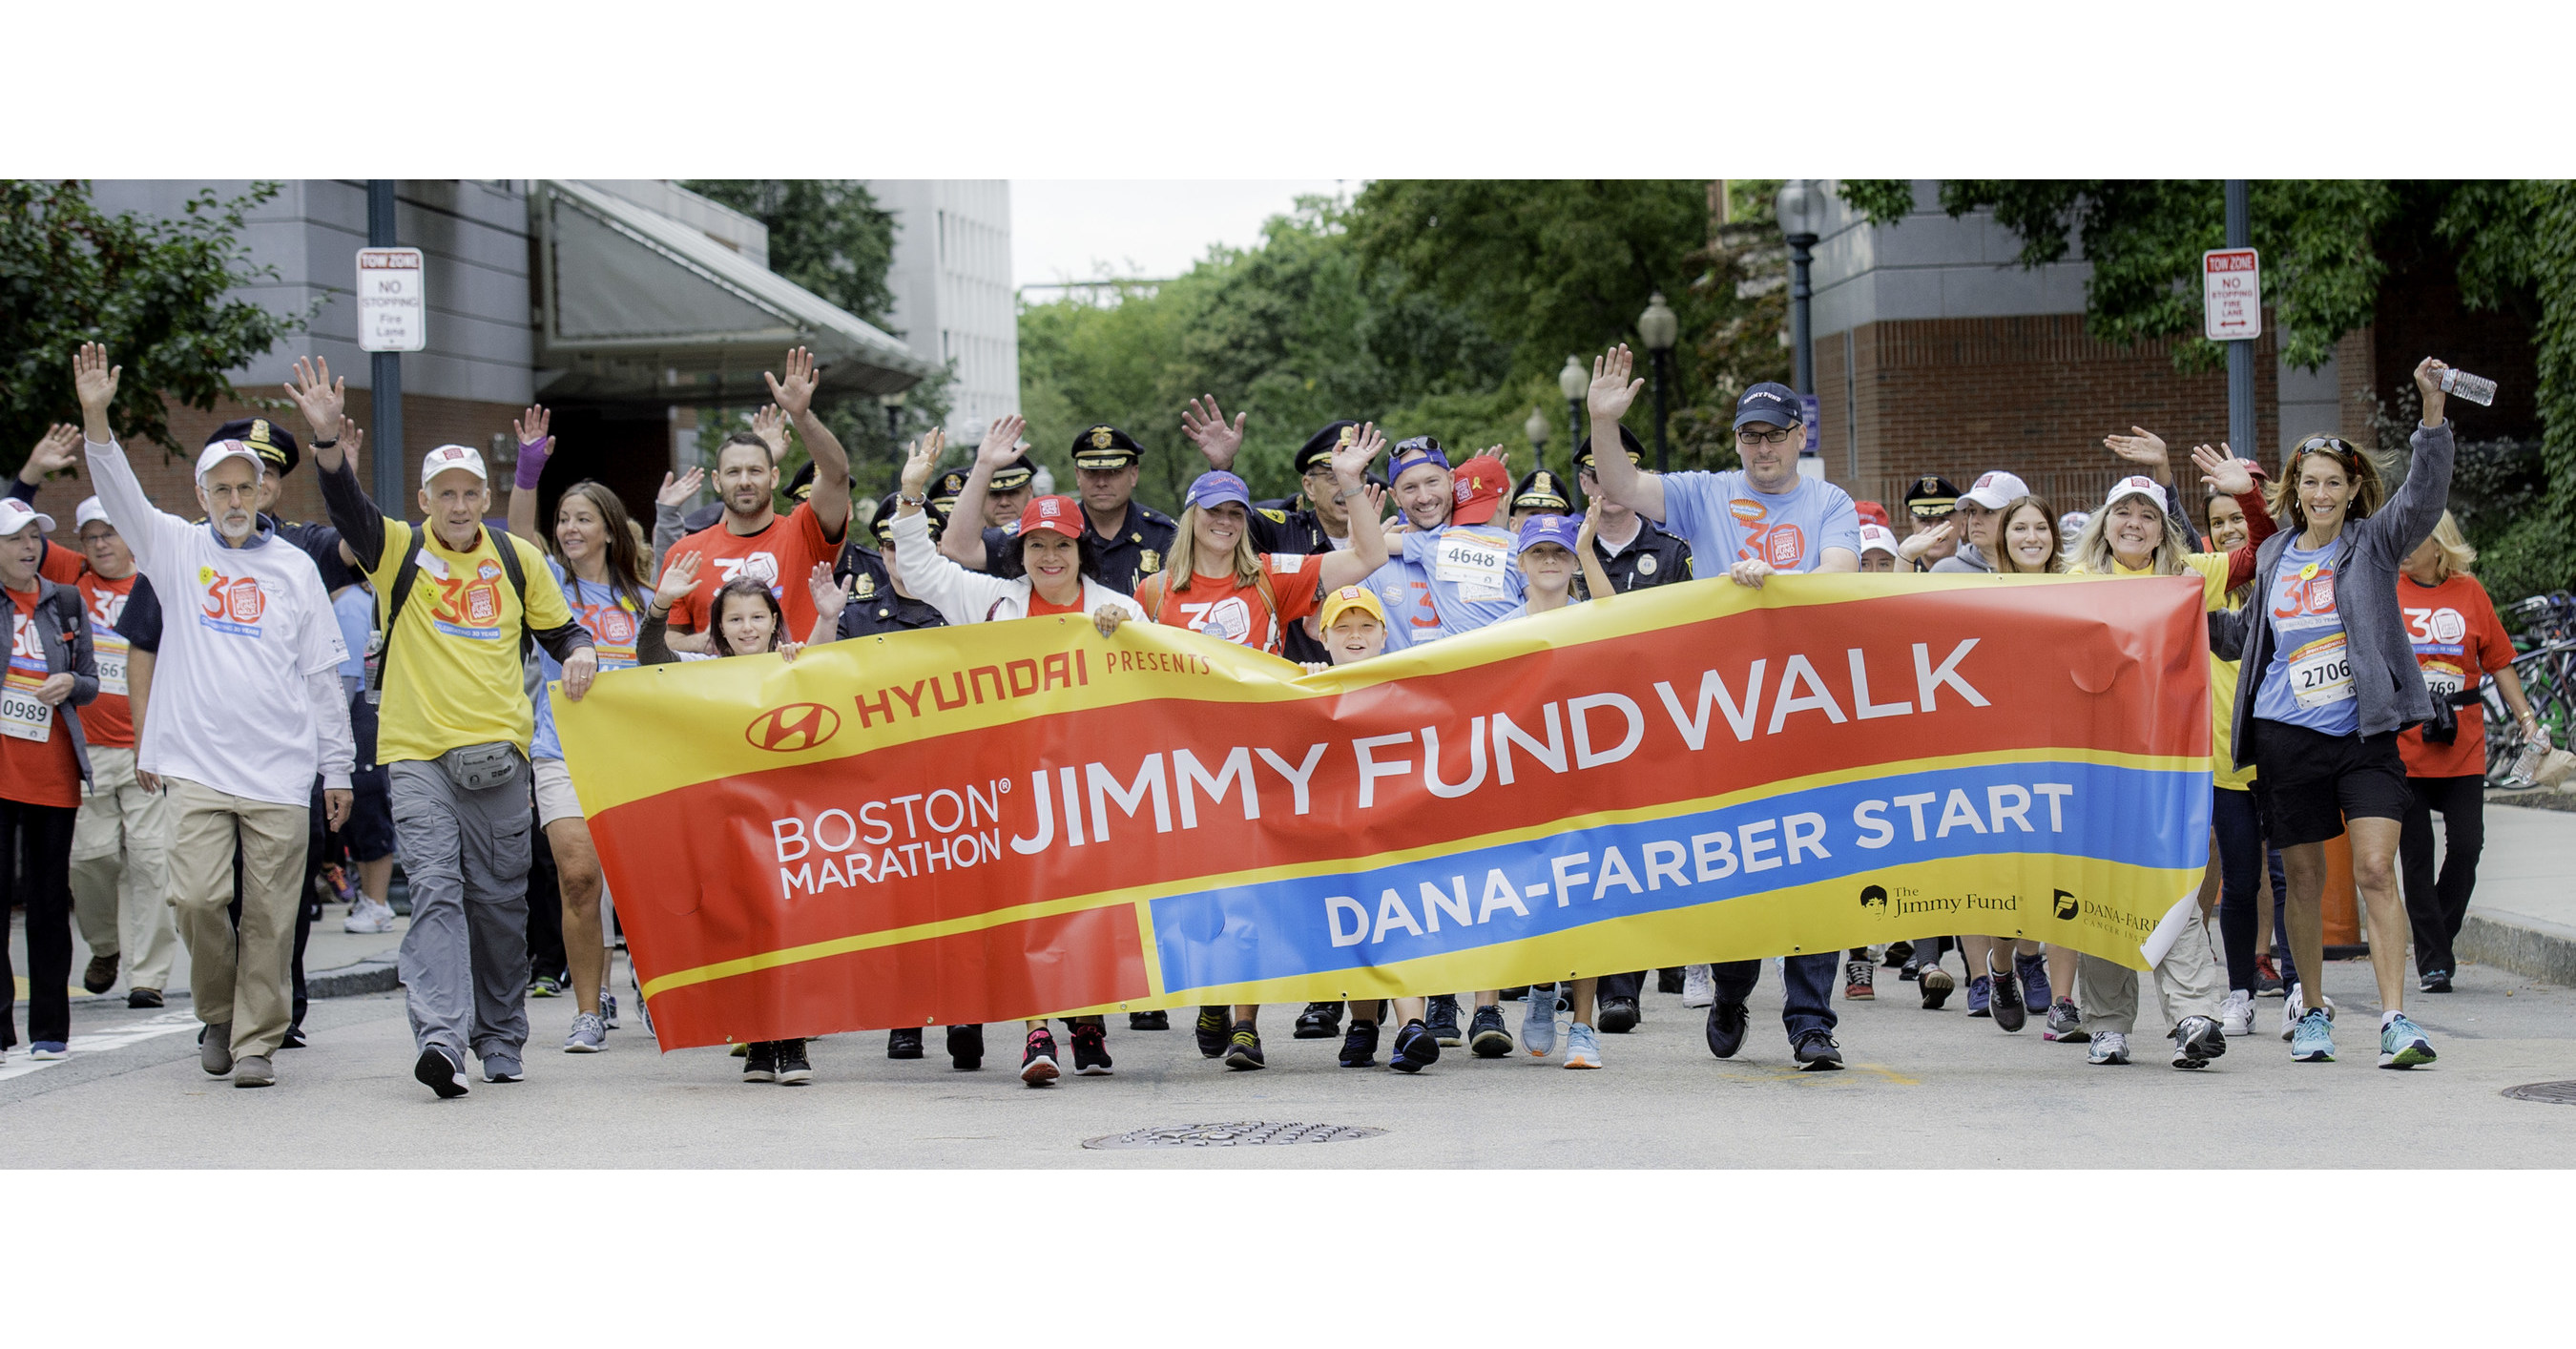 Call for Walkers Register for the 31st Annual Boston Marathon® Jimmy